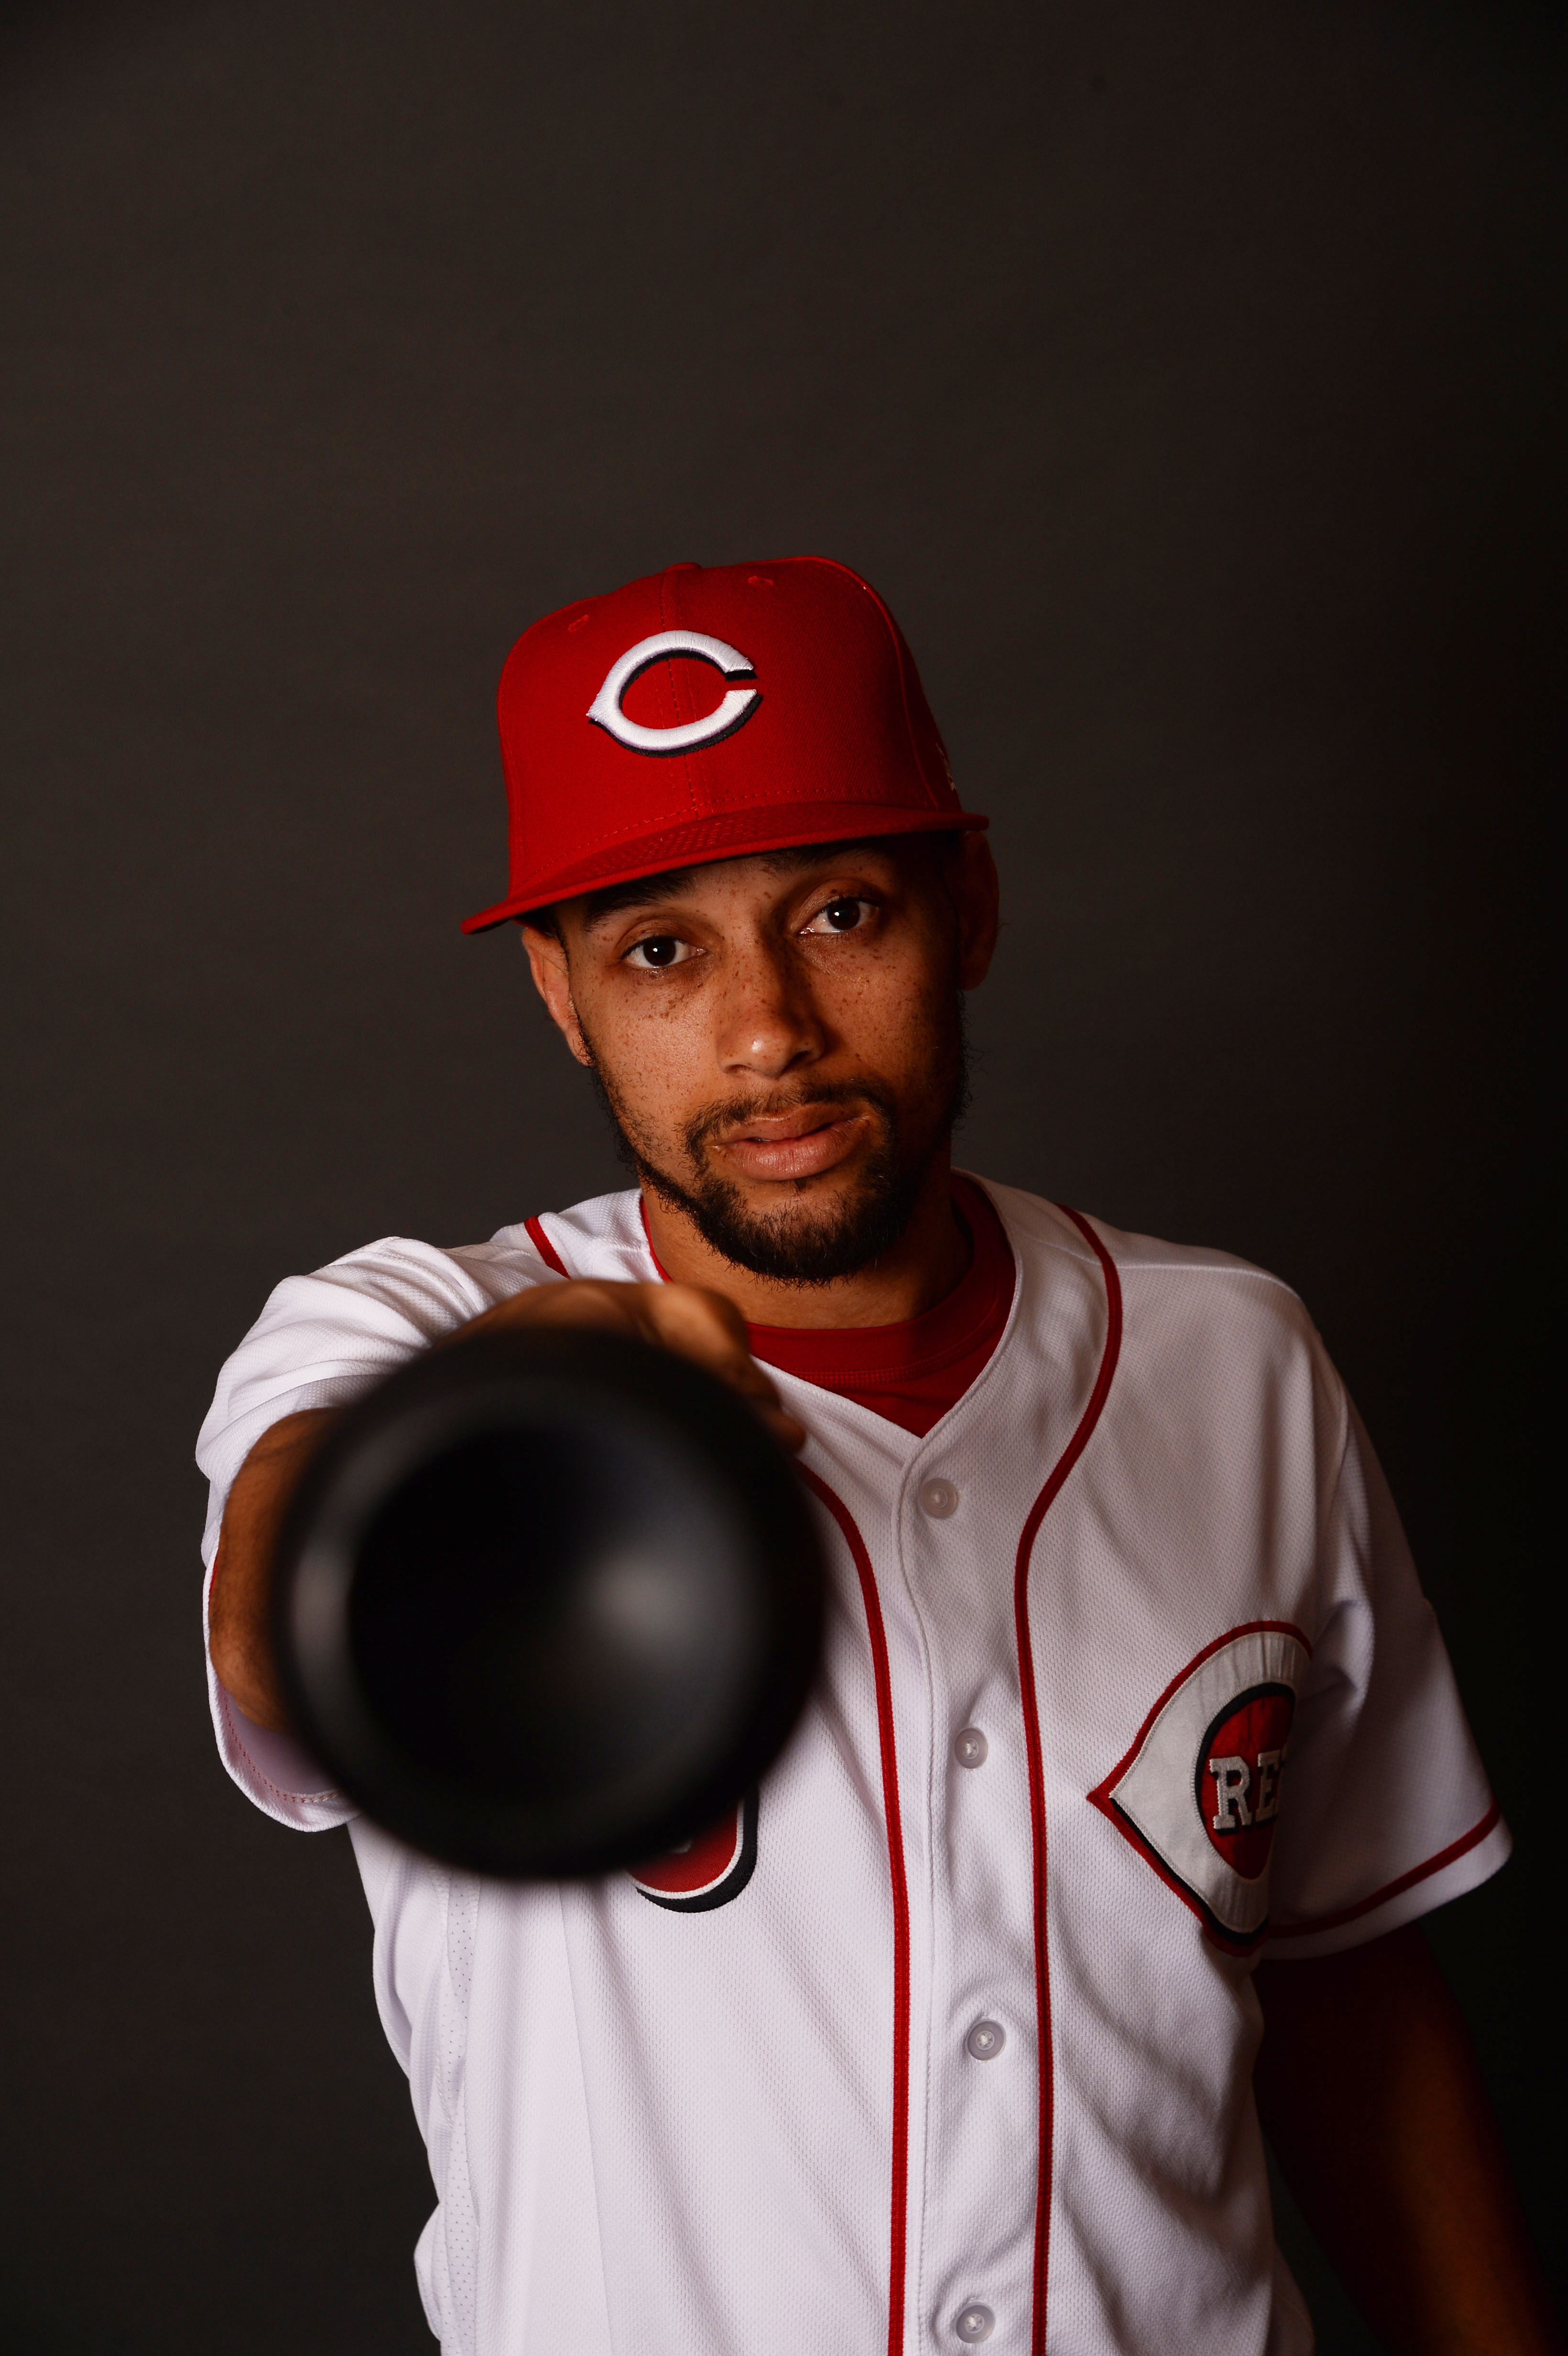 The Giants are still talking to the Reds about a Billy Hamilton